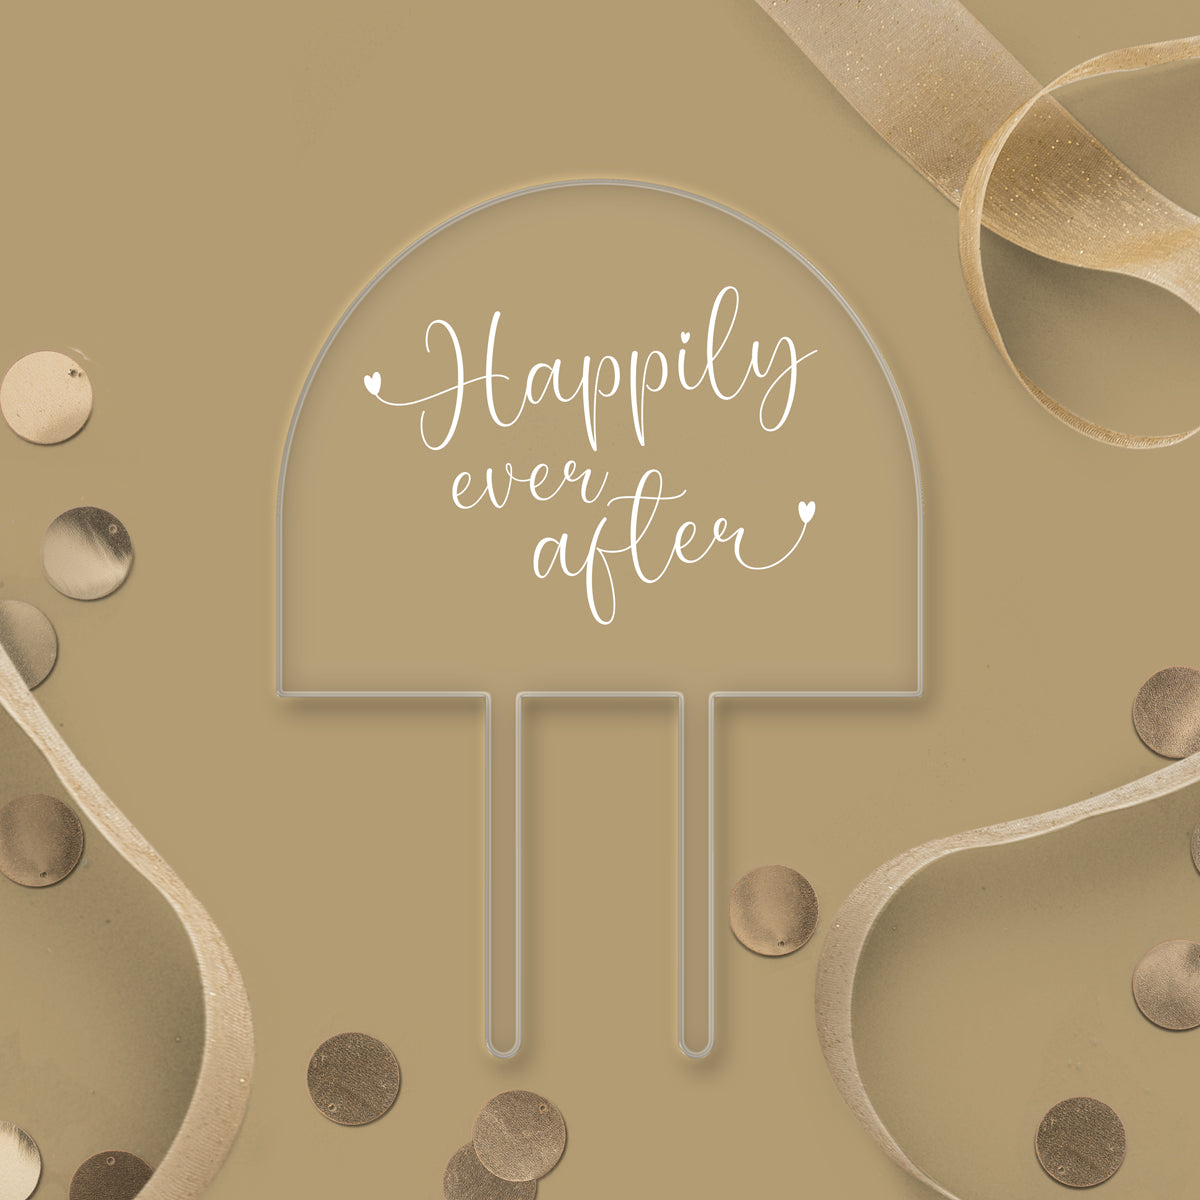 Happily Ever After Acrylic Arch Topper - White Wording